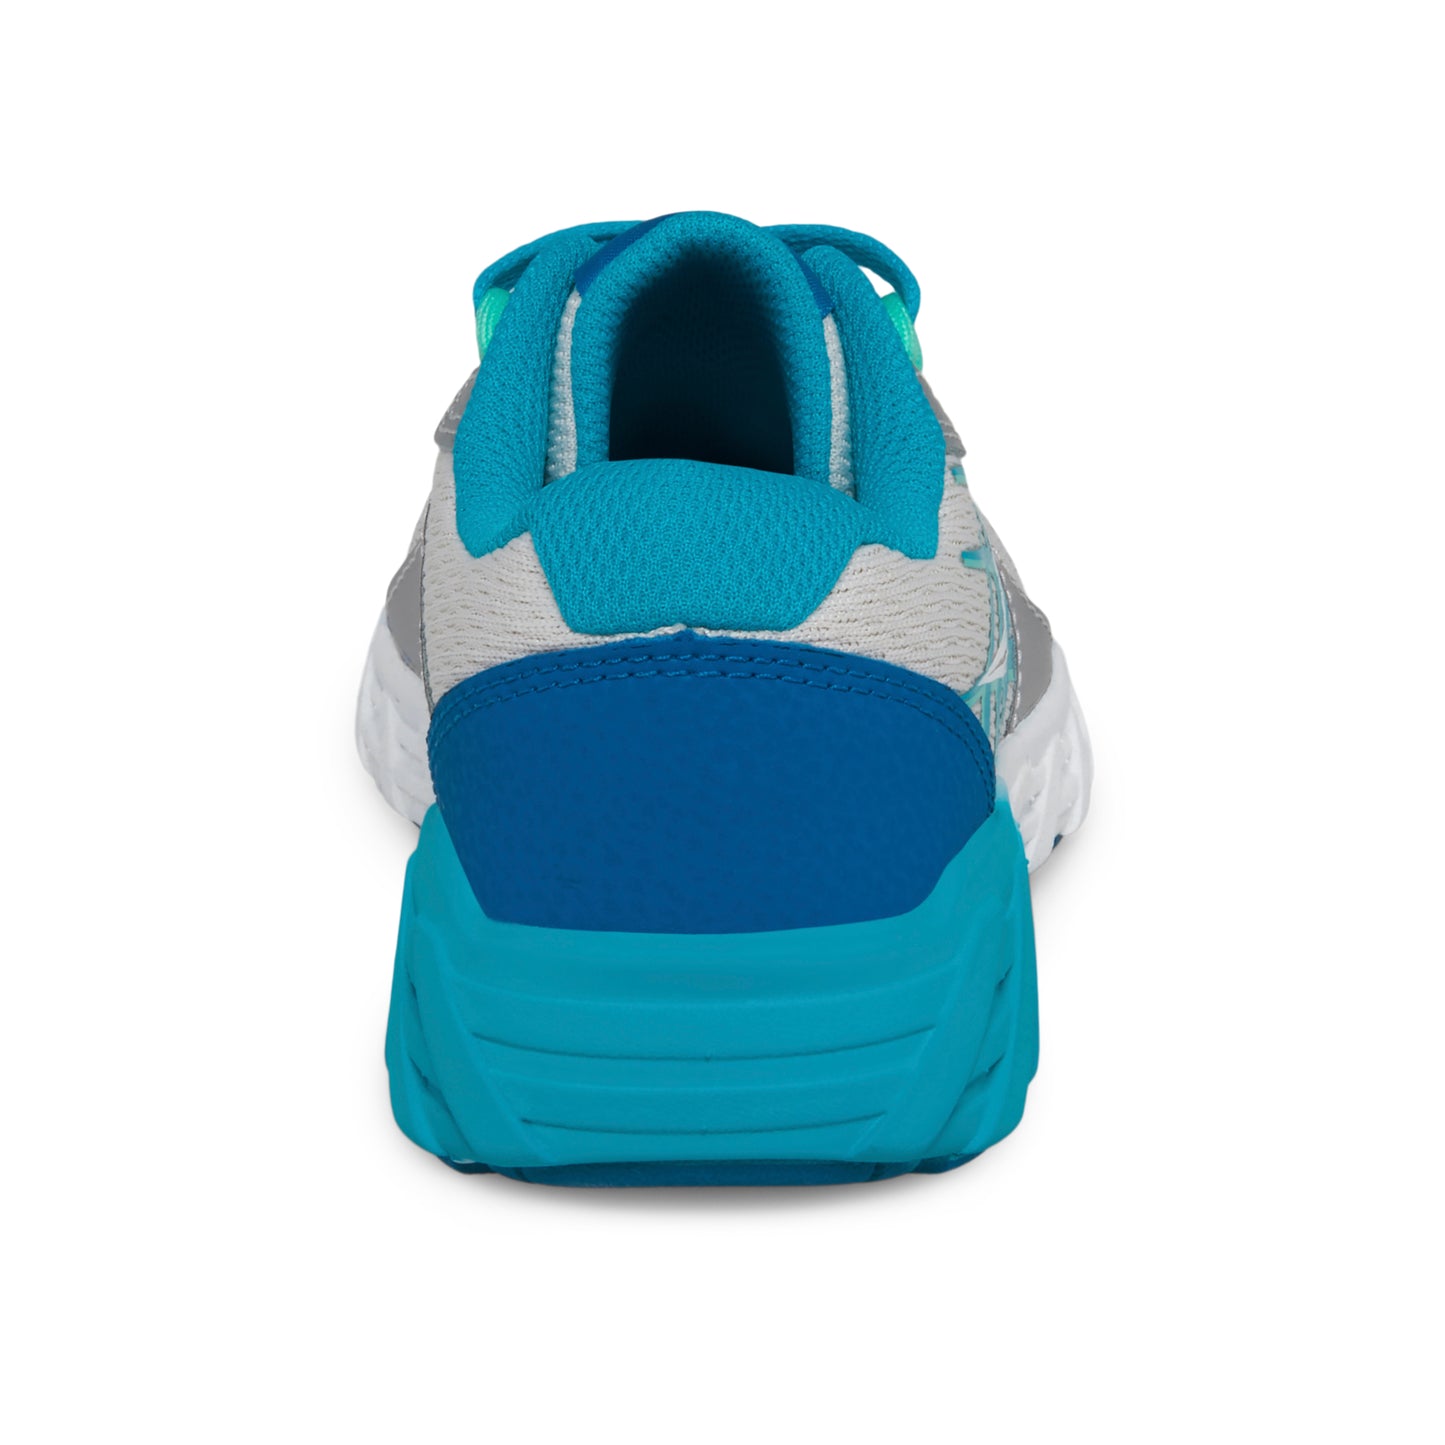 wind-20-sneaker-bigkid-turquoise-silver__Turquoise/Silver_3